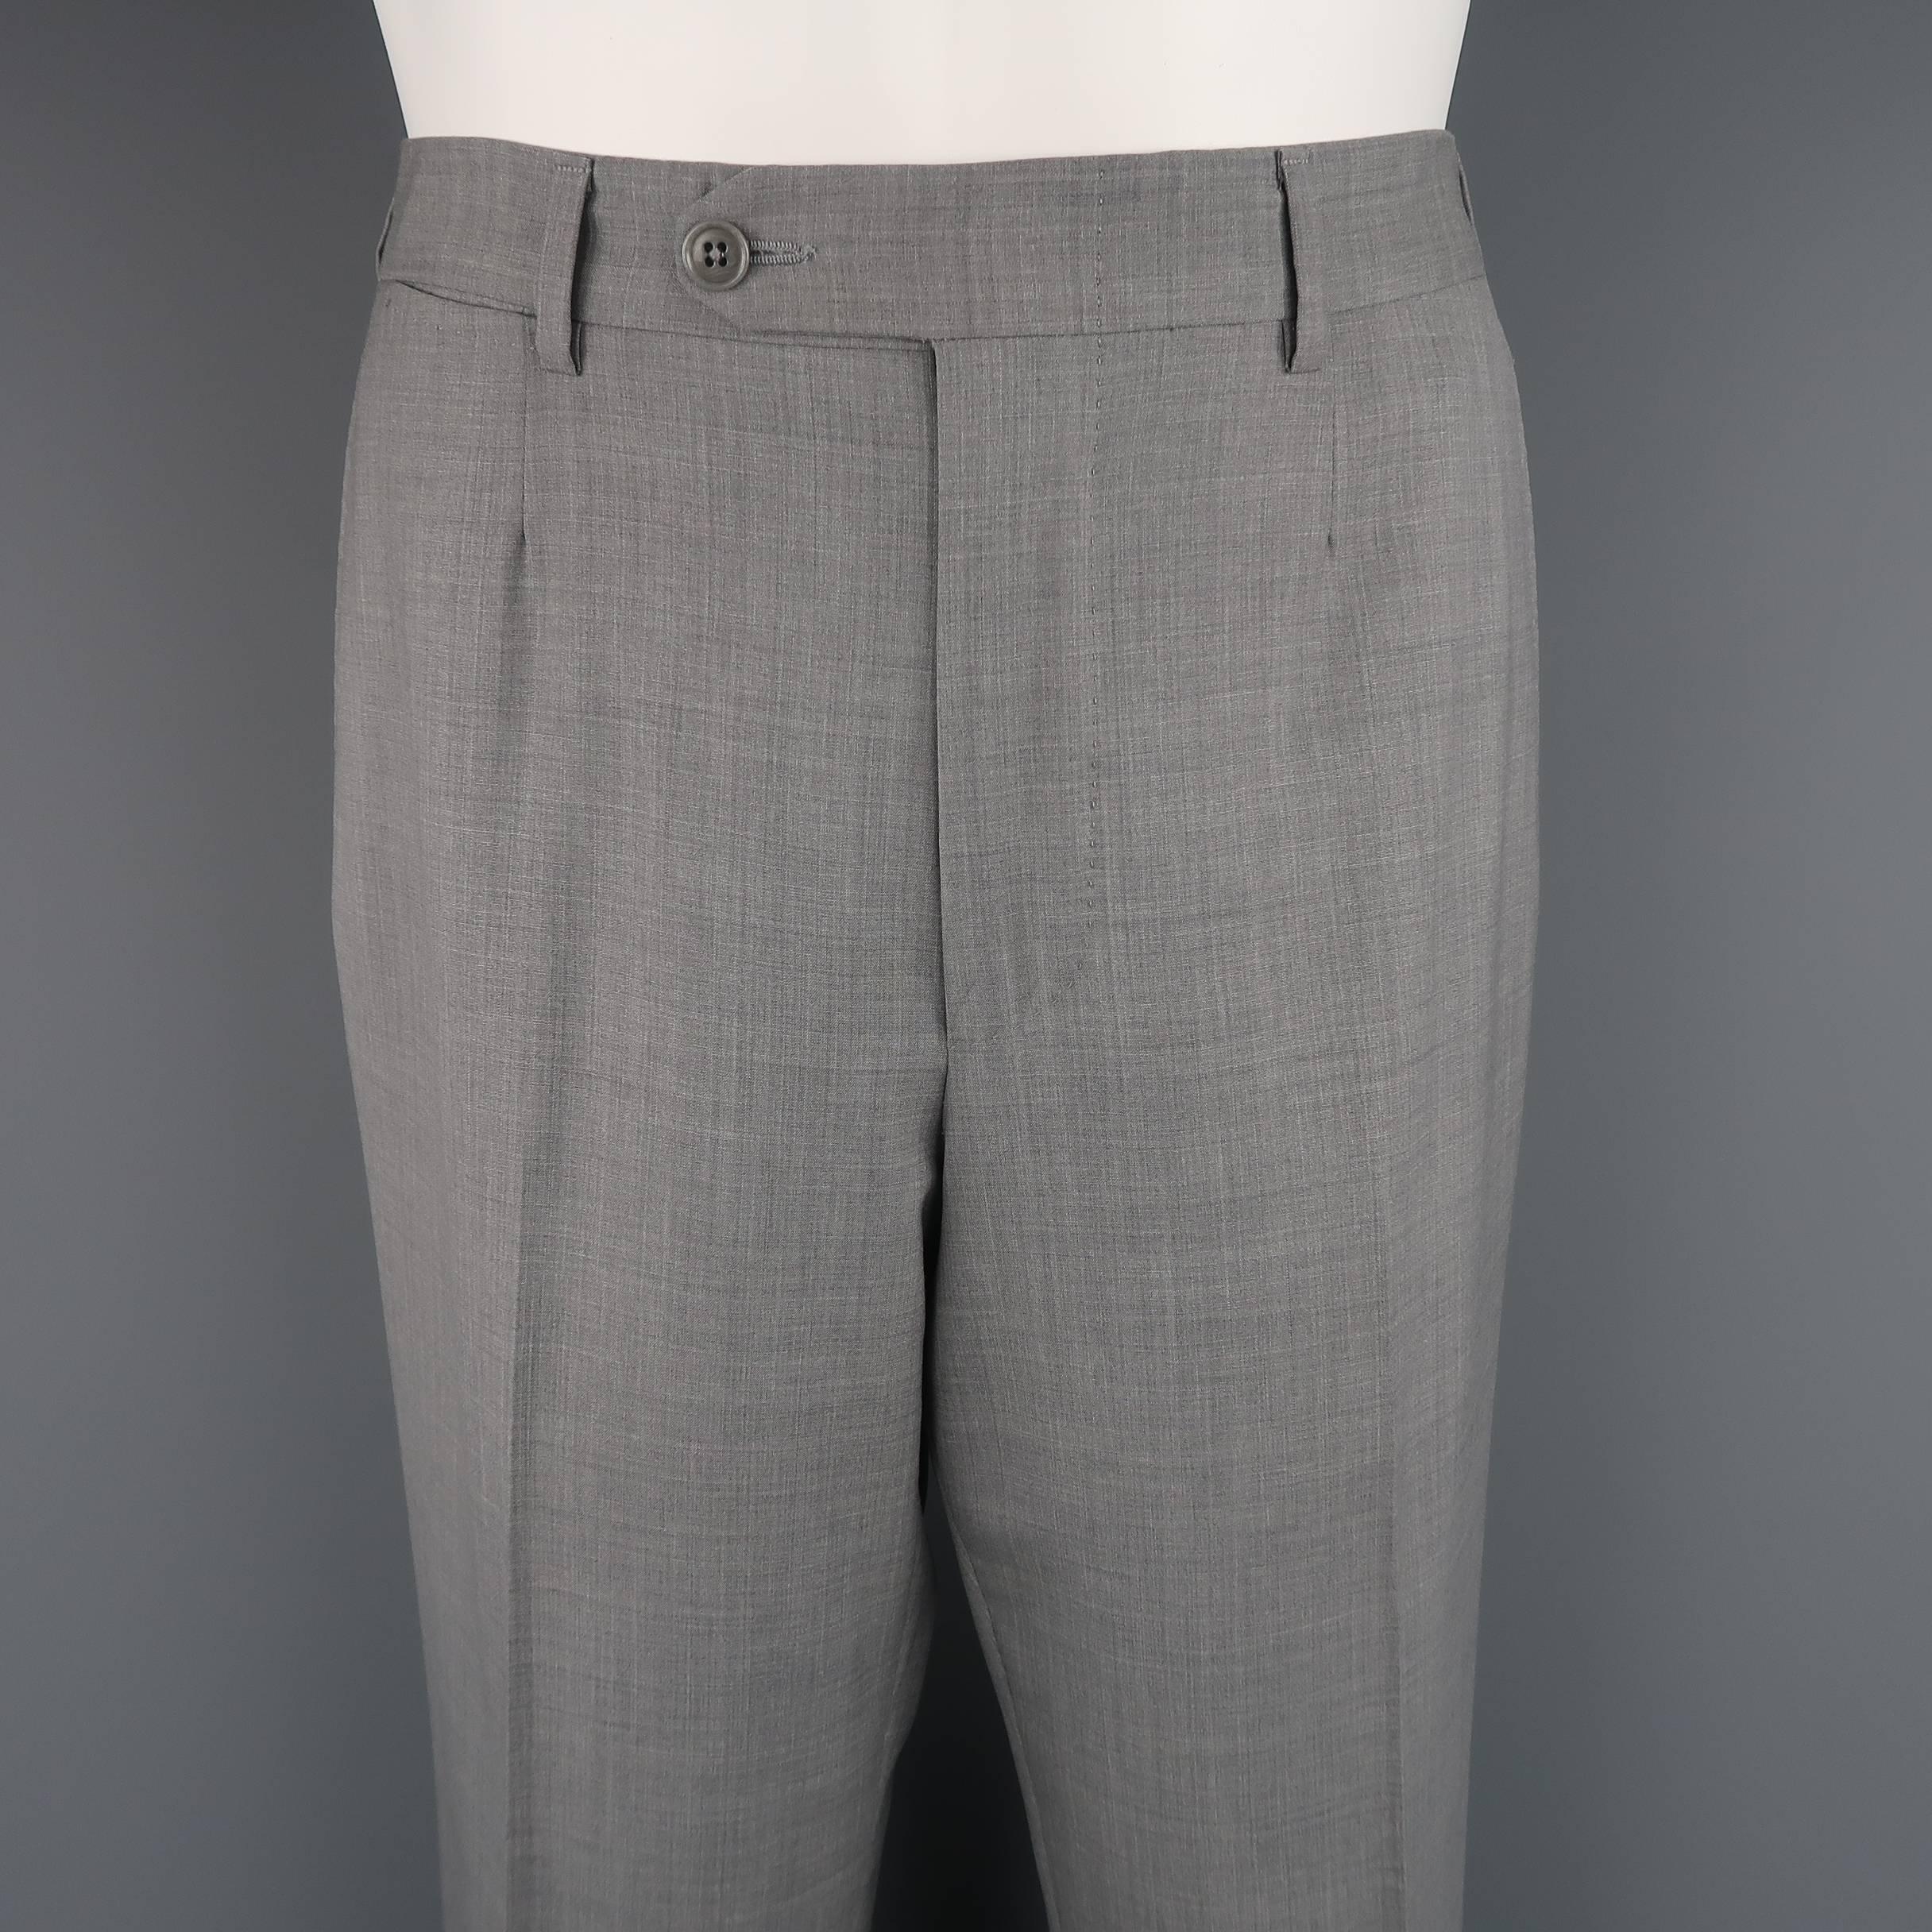 ERMENEGILDO ZEGNA dress pants come in a textured wool with a flat front. Made in Spain.
 
Excellent Pre-Owned Condition.
Marked: IT 48 R
 
Measurements:
 
Waist: 32 in. (+2 in. )
Rise: 10.5 in.
Inseam: 31 in. (+2.25 in. )
 
(Let Out Room)
